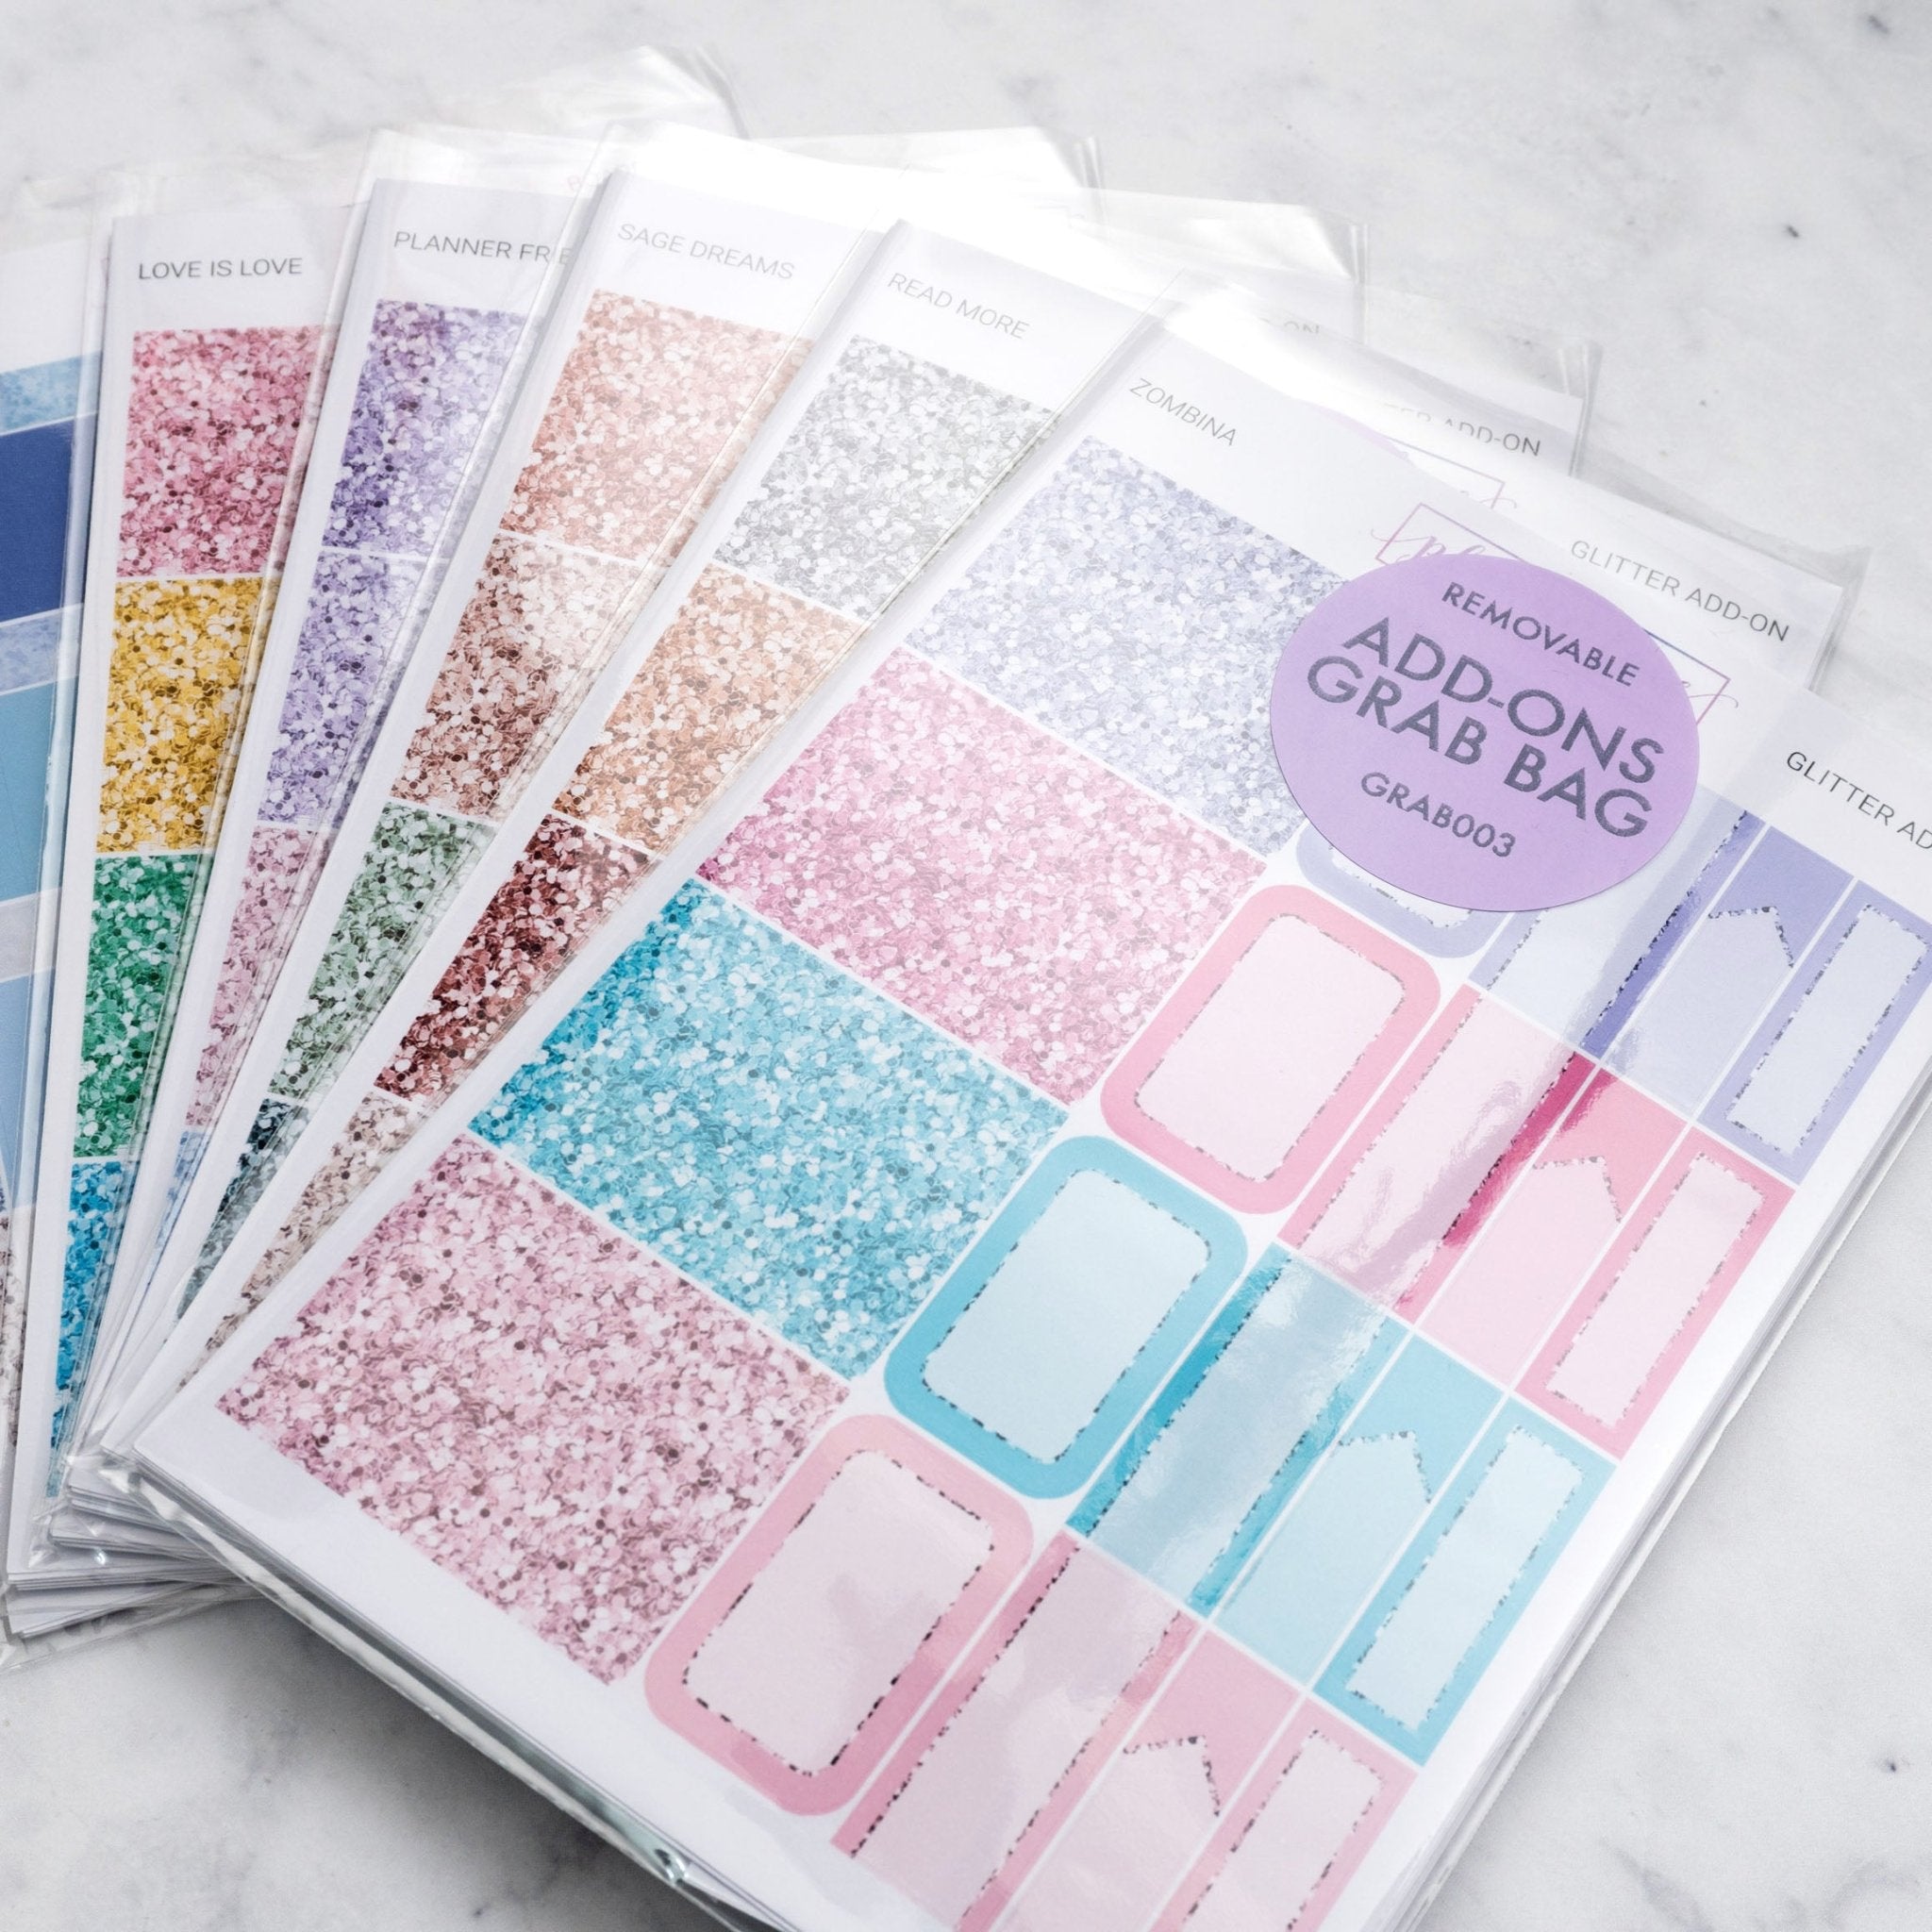 Add-ons Grab Bag (10 Sheets) by Plannerface